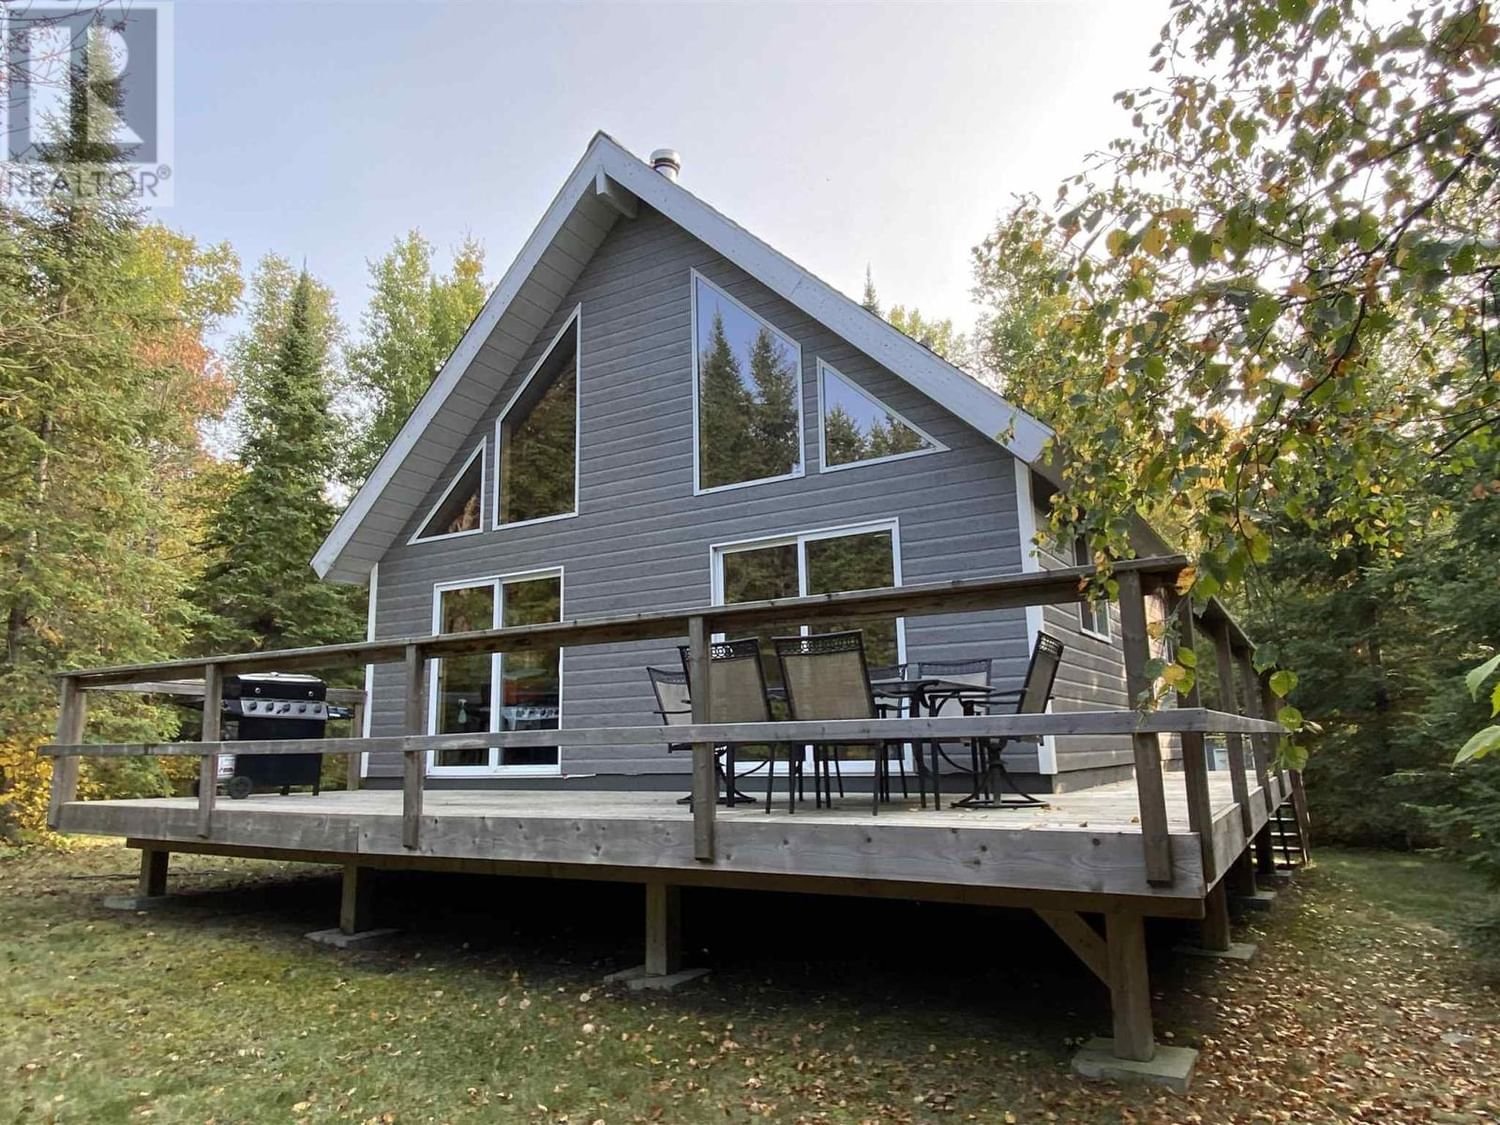 Lot 16 Brule Point|Lake of the Woods Image 1